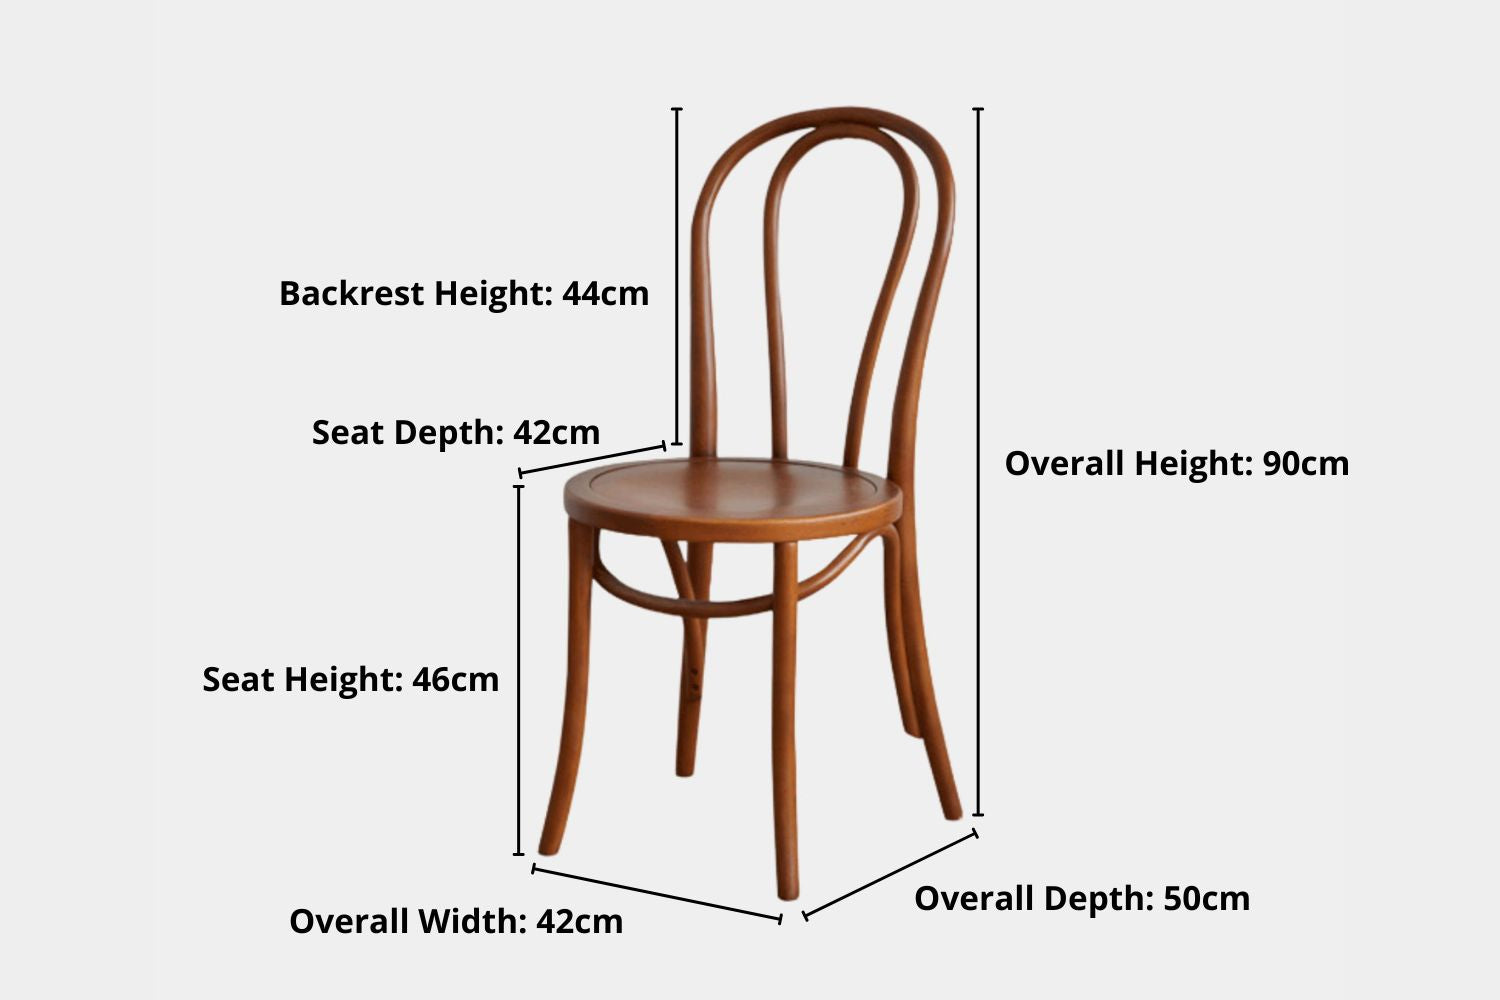 Key product dimensions such as depth, width and height for Teddy Beech Wood Chair